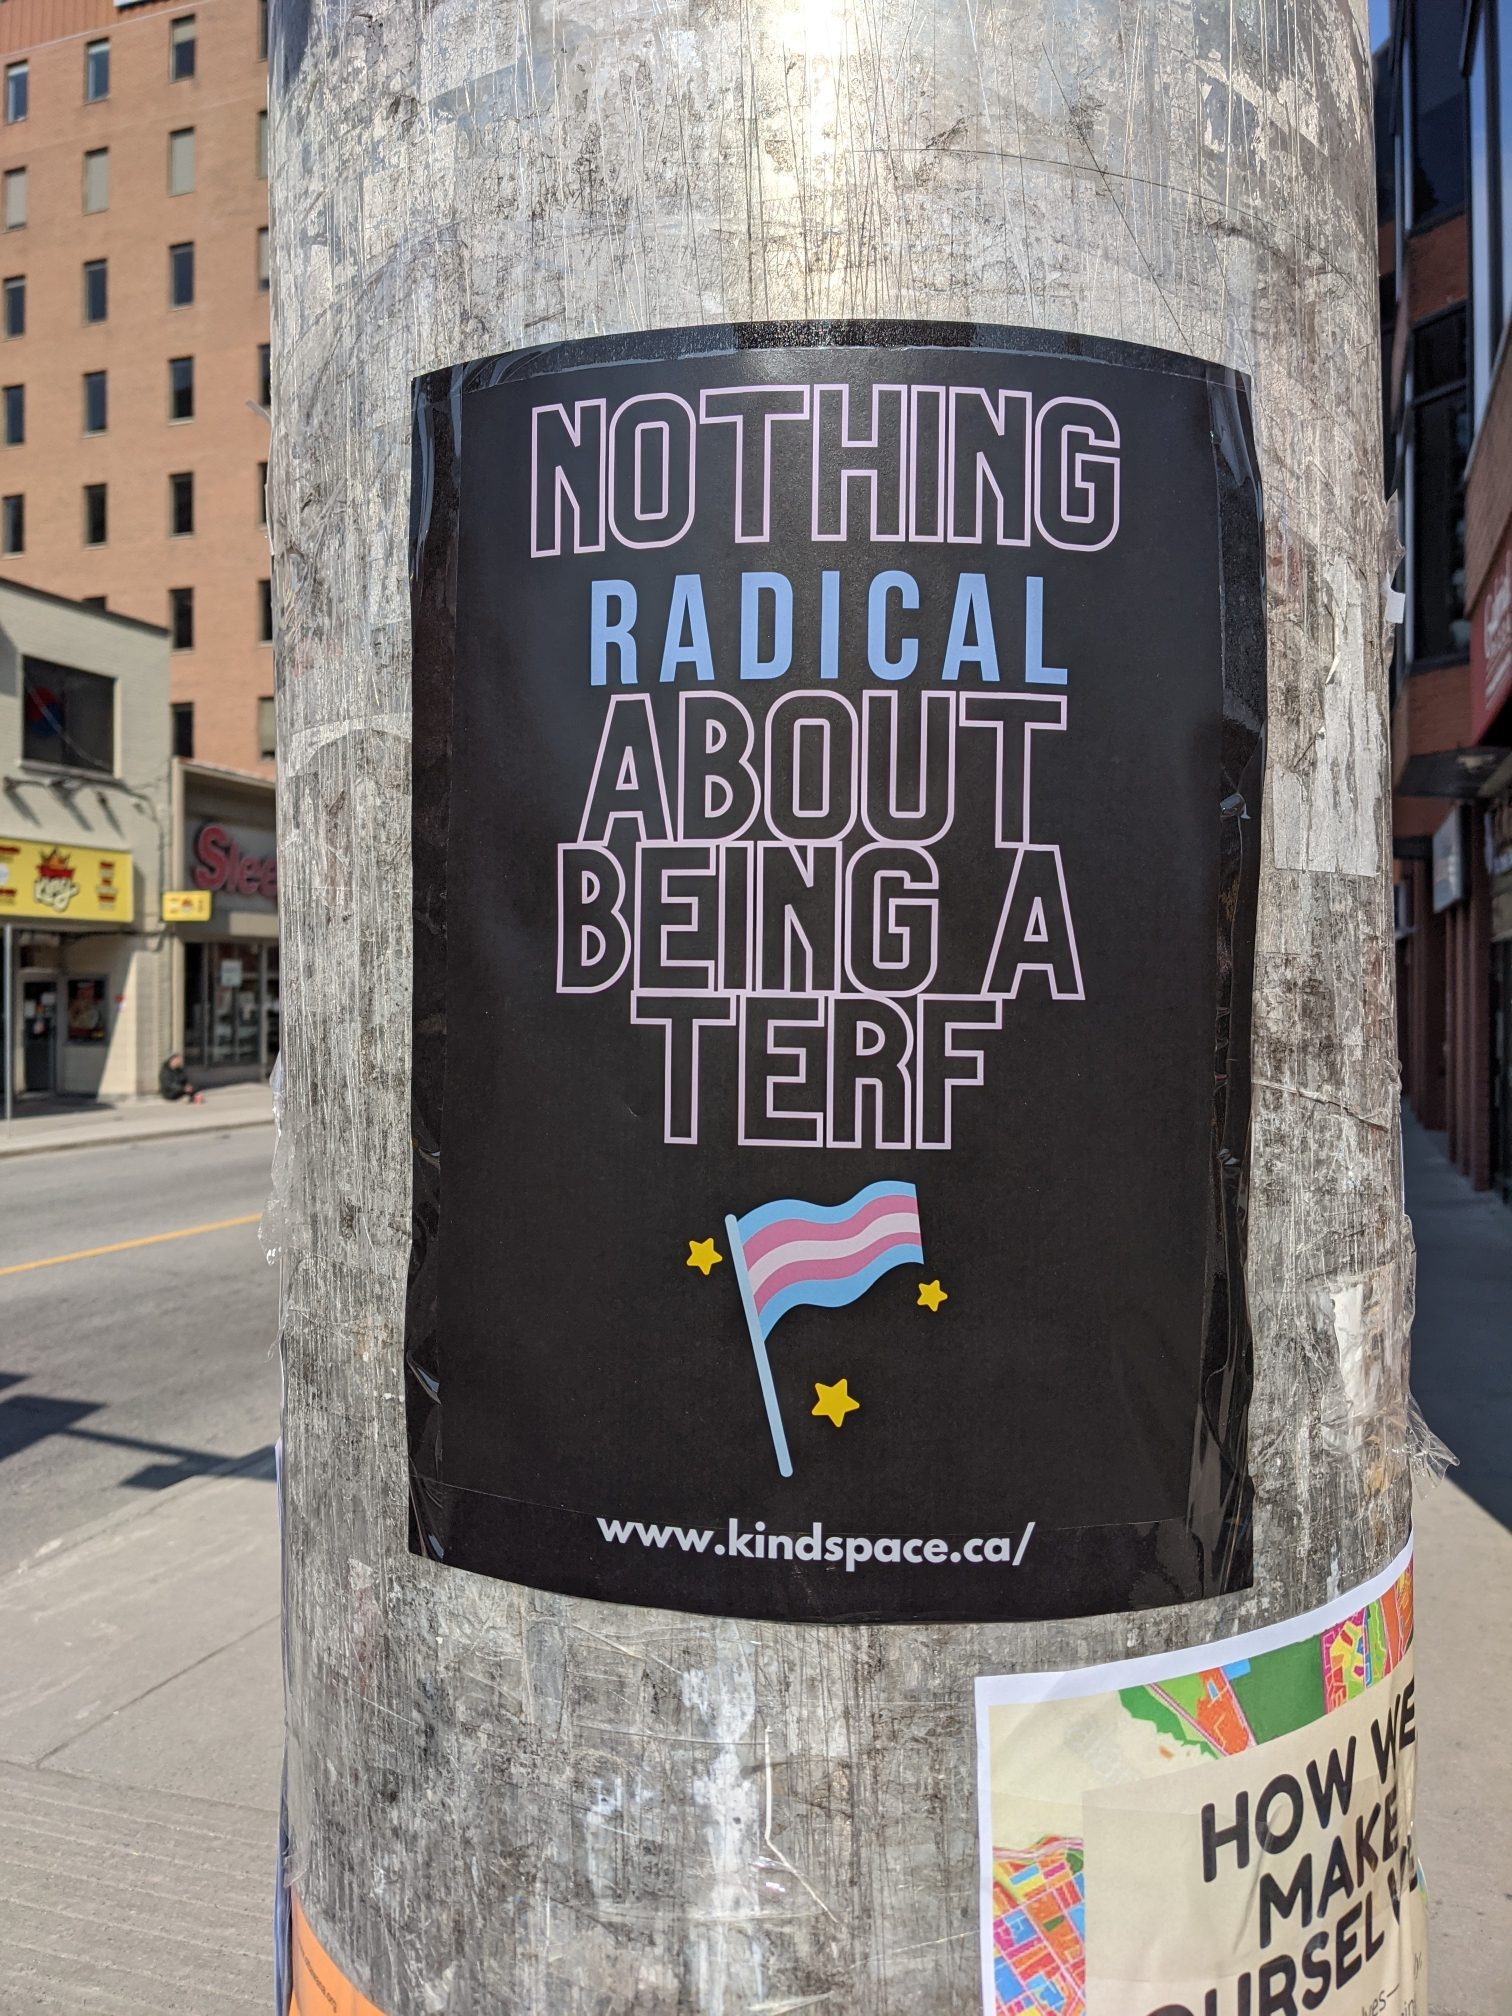 Trans rights posters vandalized